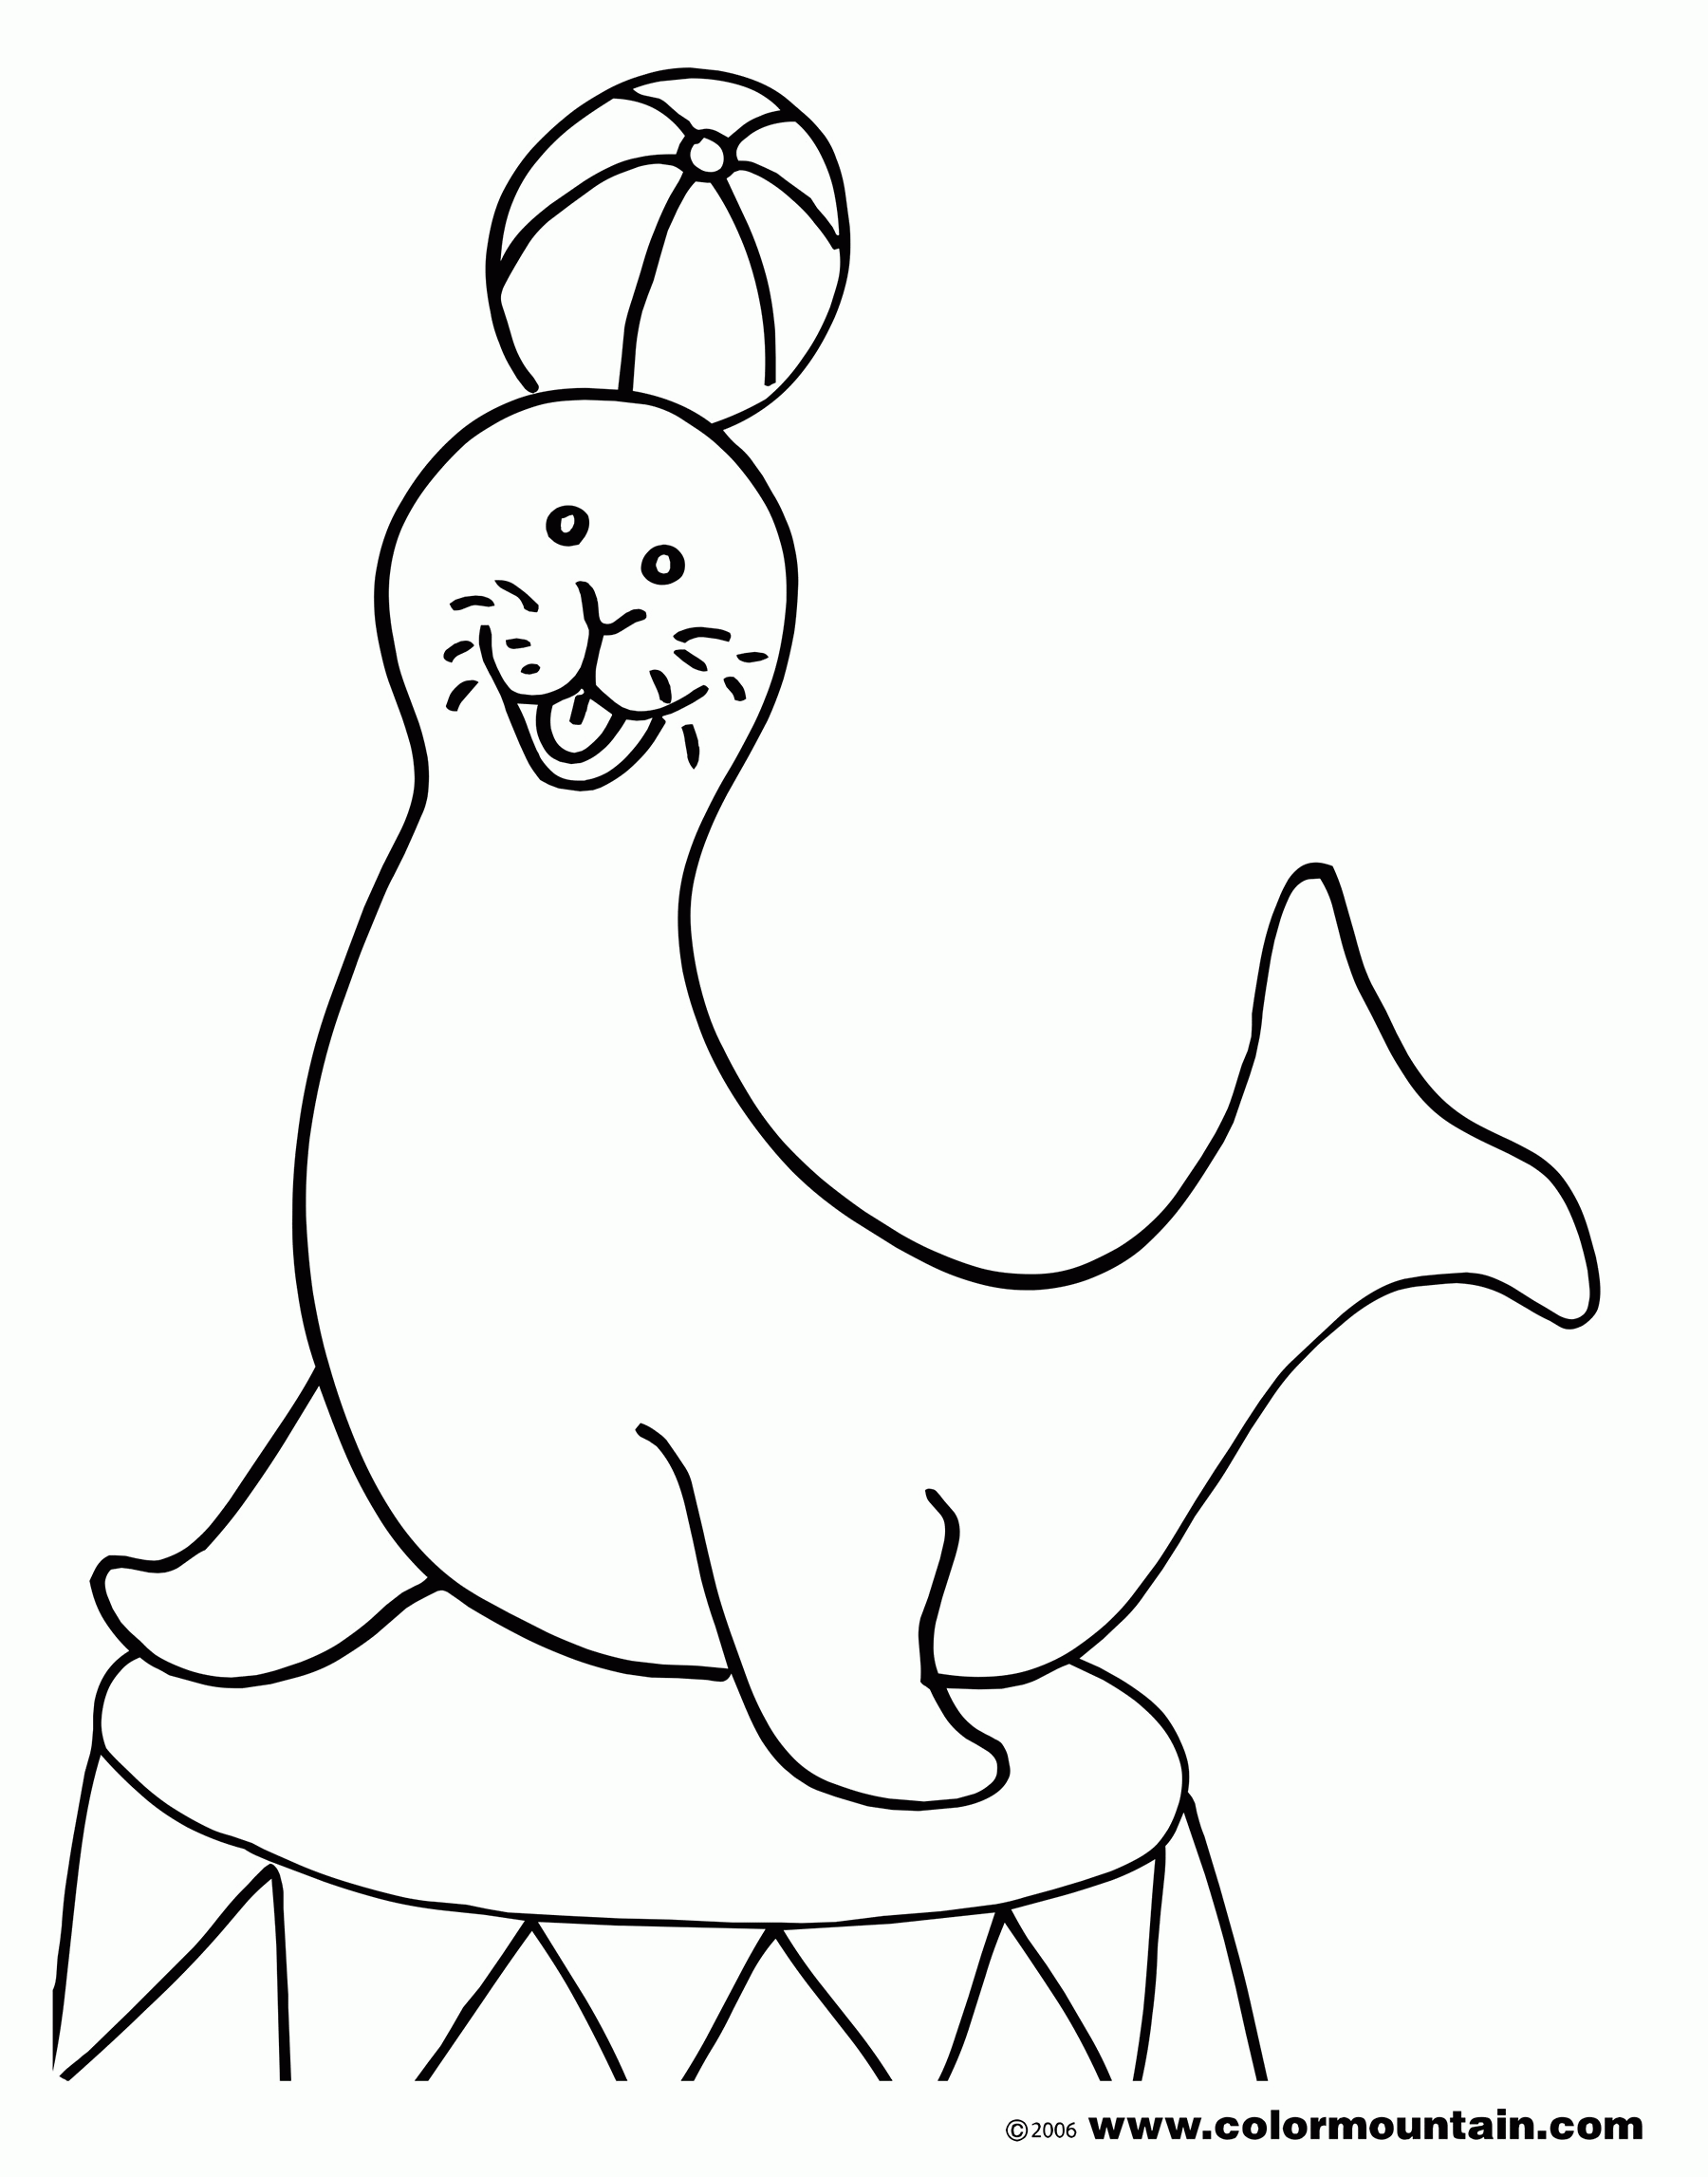 free circus ds seal 1 coloring page - VoteForVerde.com